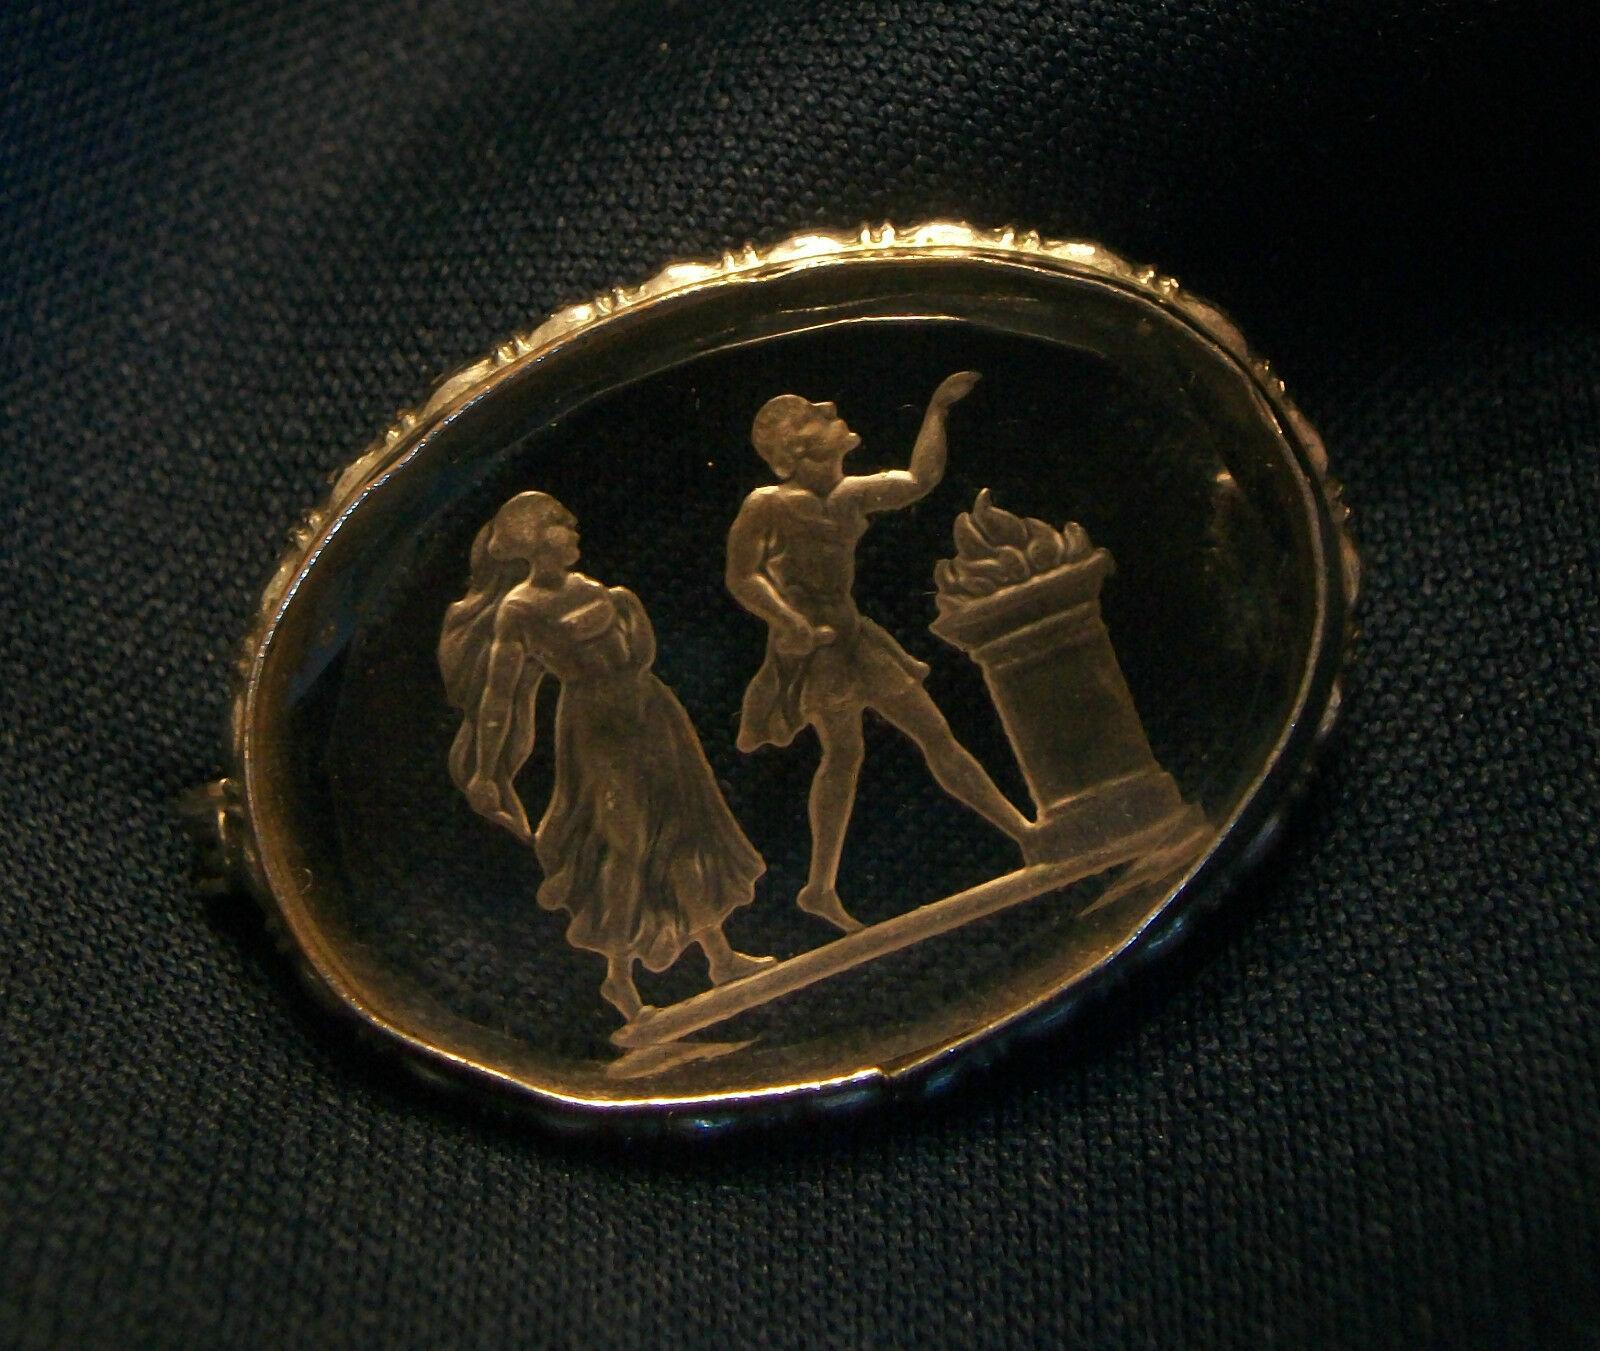 Neoclassical Antique Crystal Reverse Intaglio Brooch, Unsigned, France, Early 20th Century